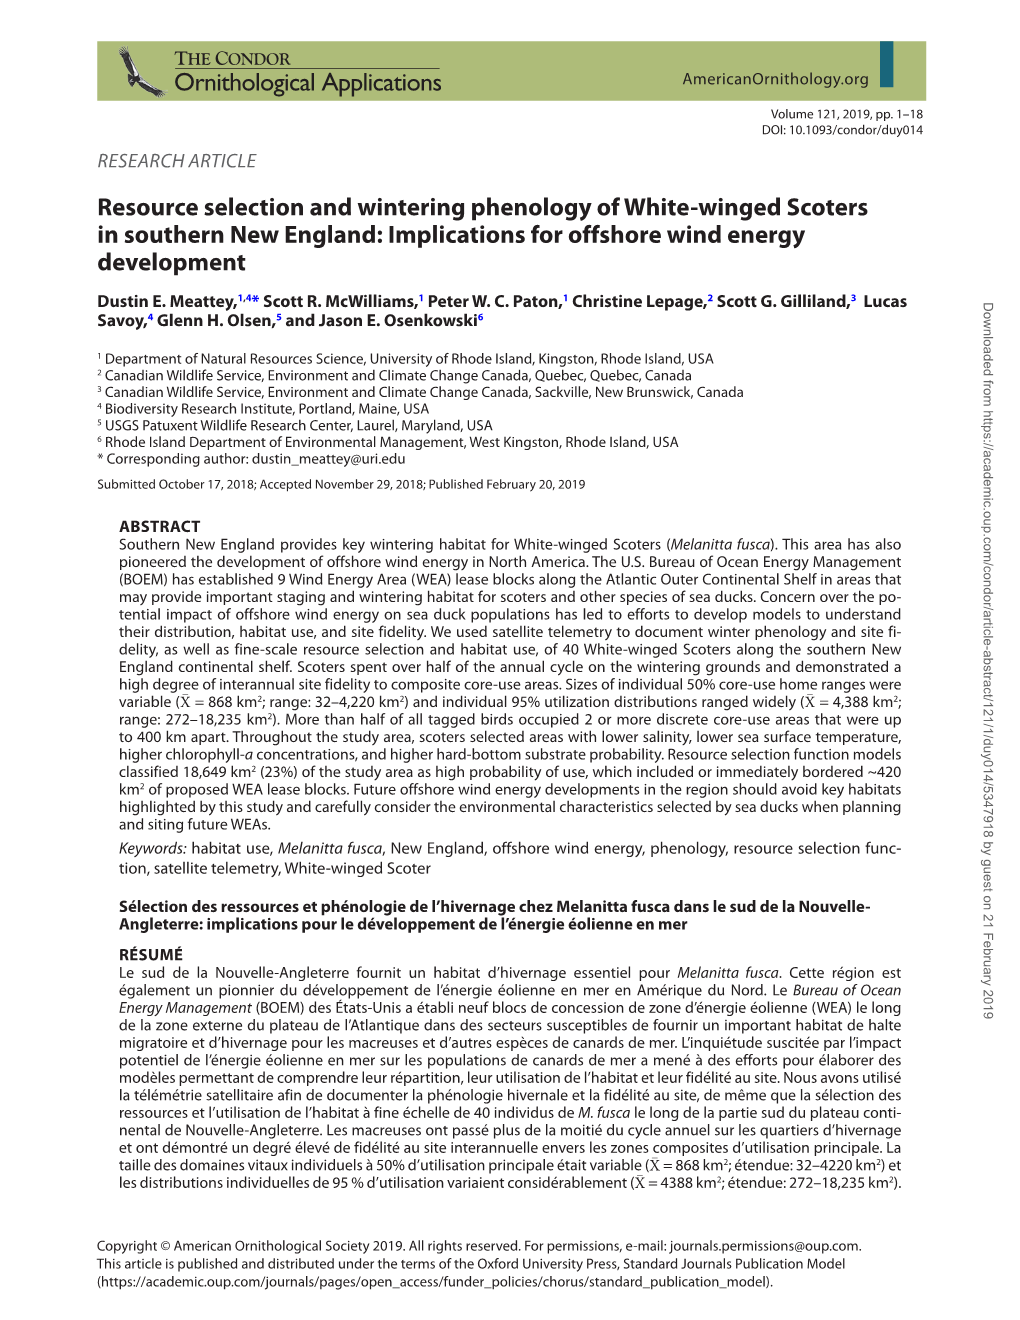 Resource Selection and Wintering Phenology of White-Winged Scoters in Southern New England: Implications for Offshore Wind Energy Development